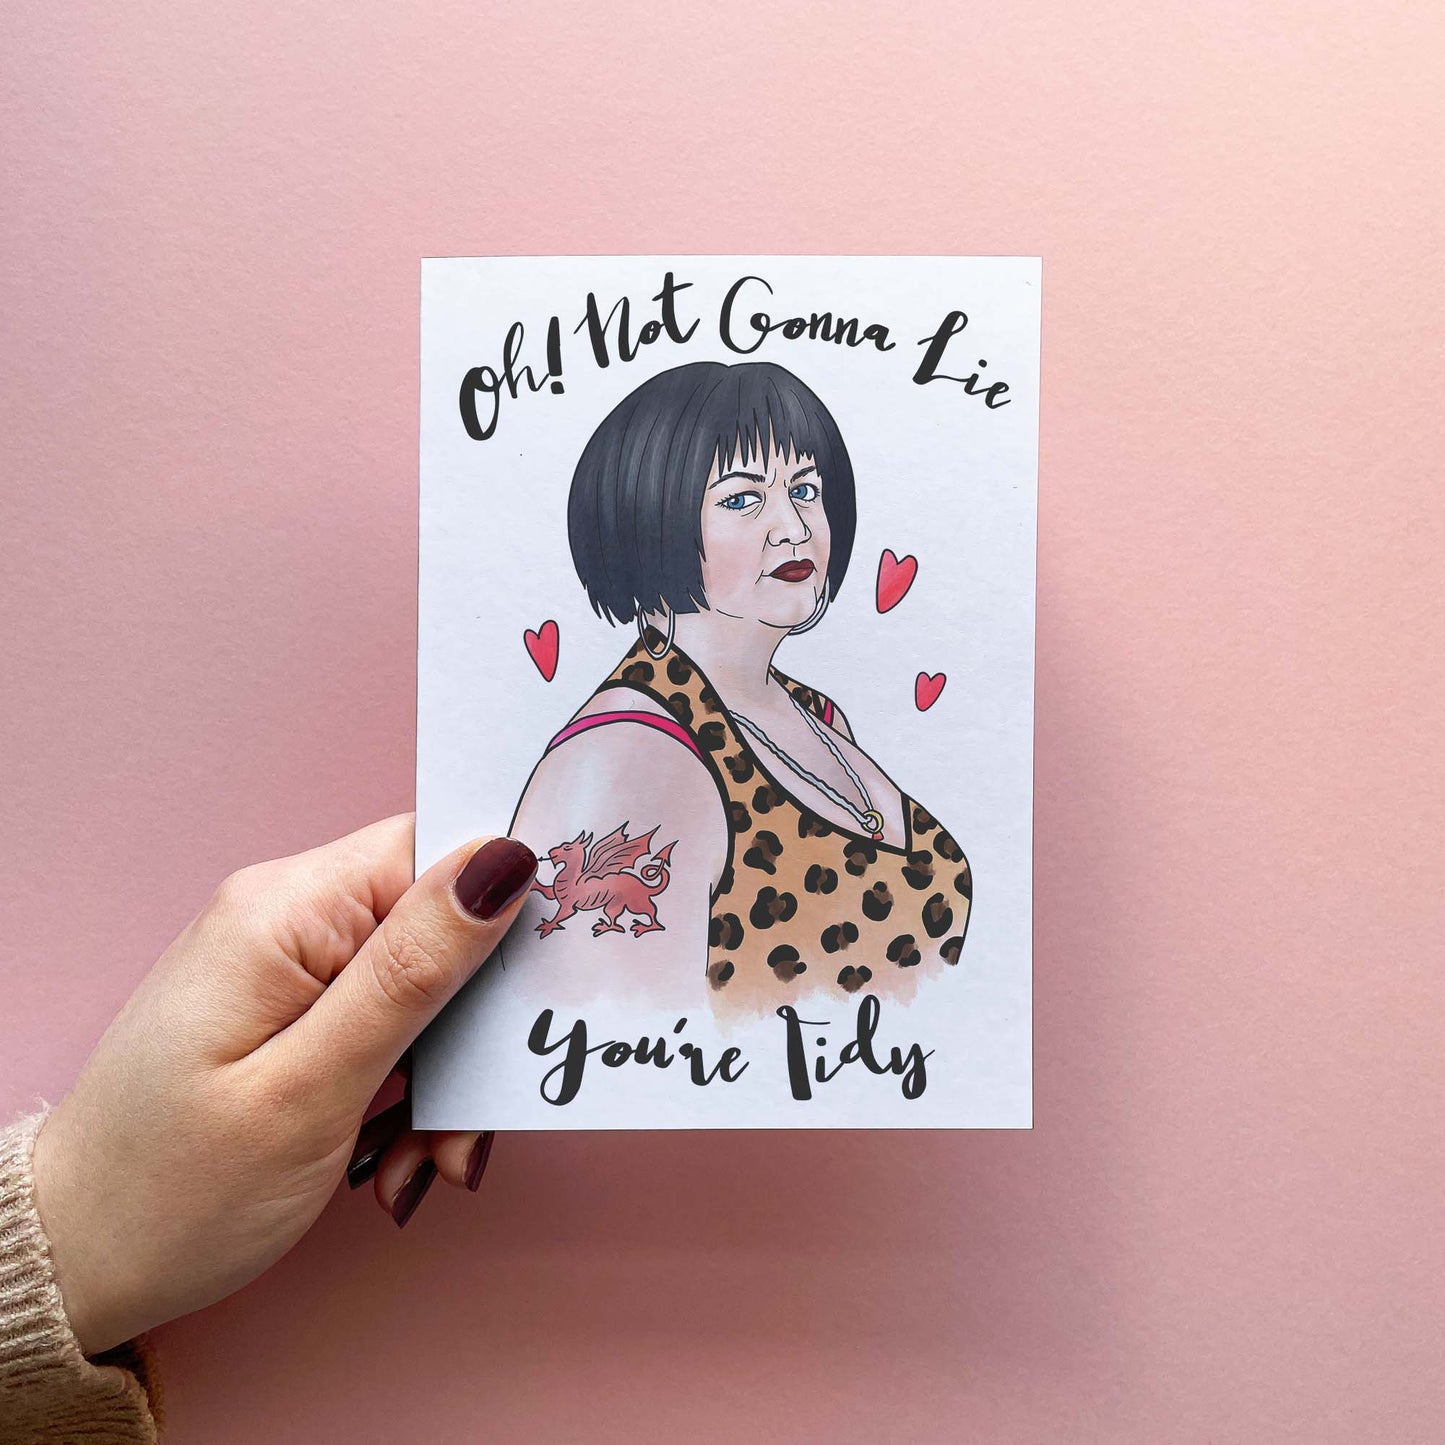 You're Tidy - Funny Valentine's Day Card